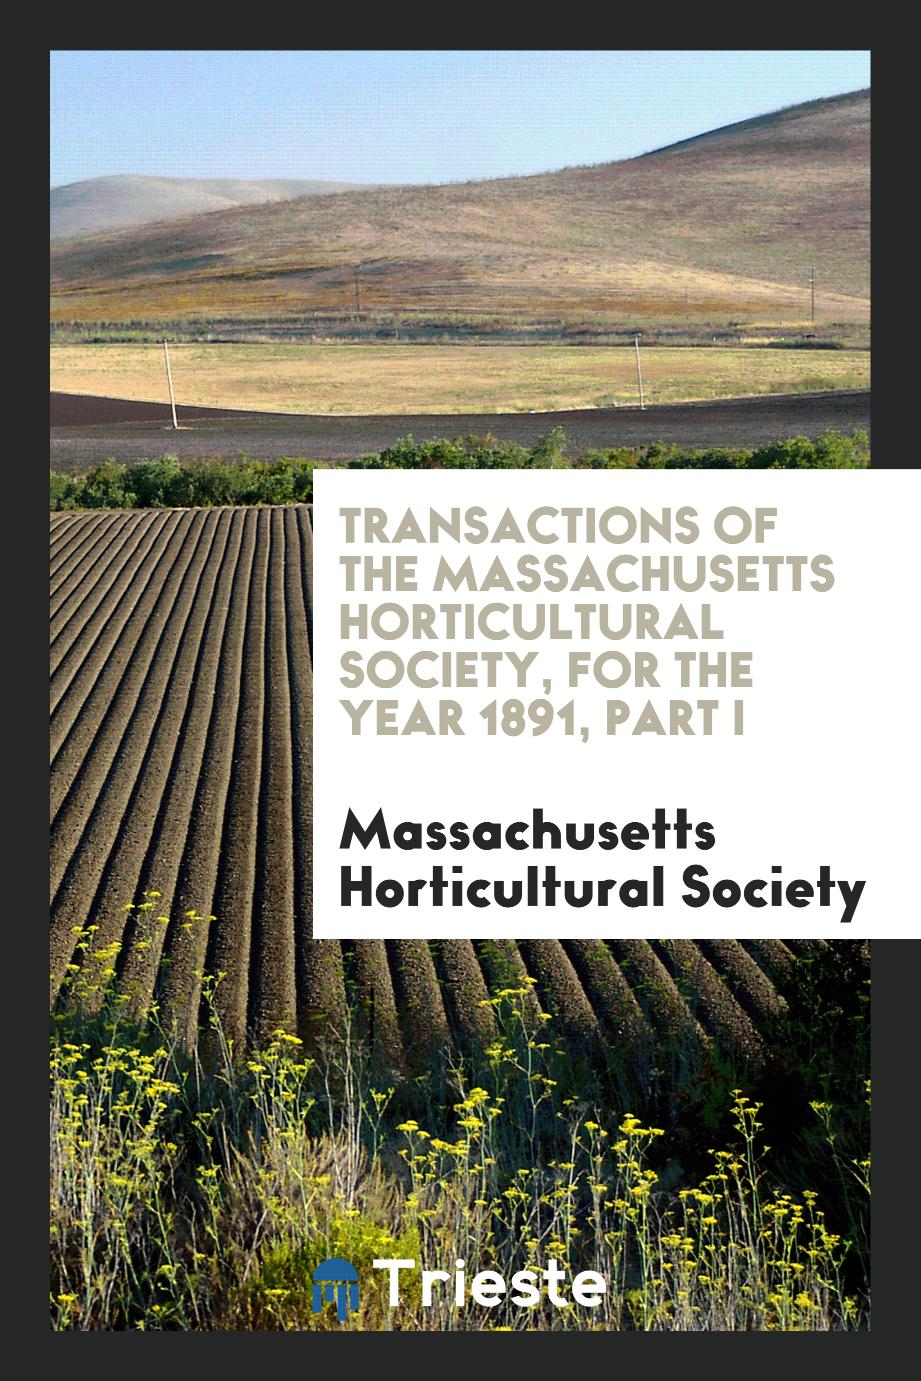 Transactions of the Massachusetts Horticultural Society, for the Year 1891, Part I